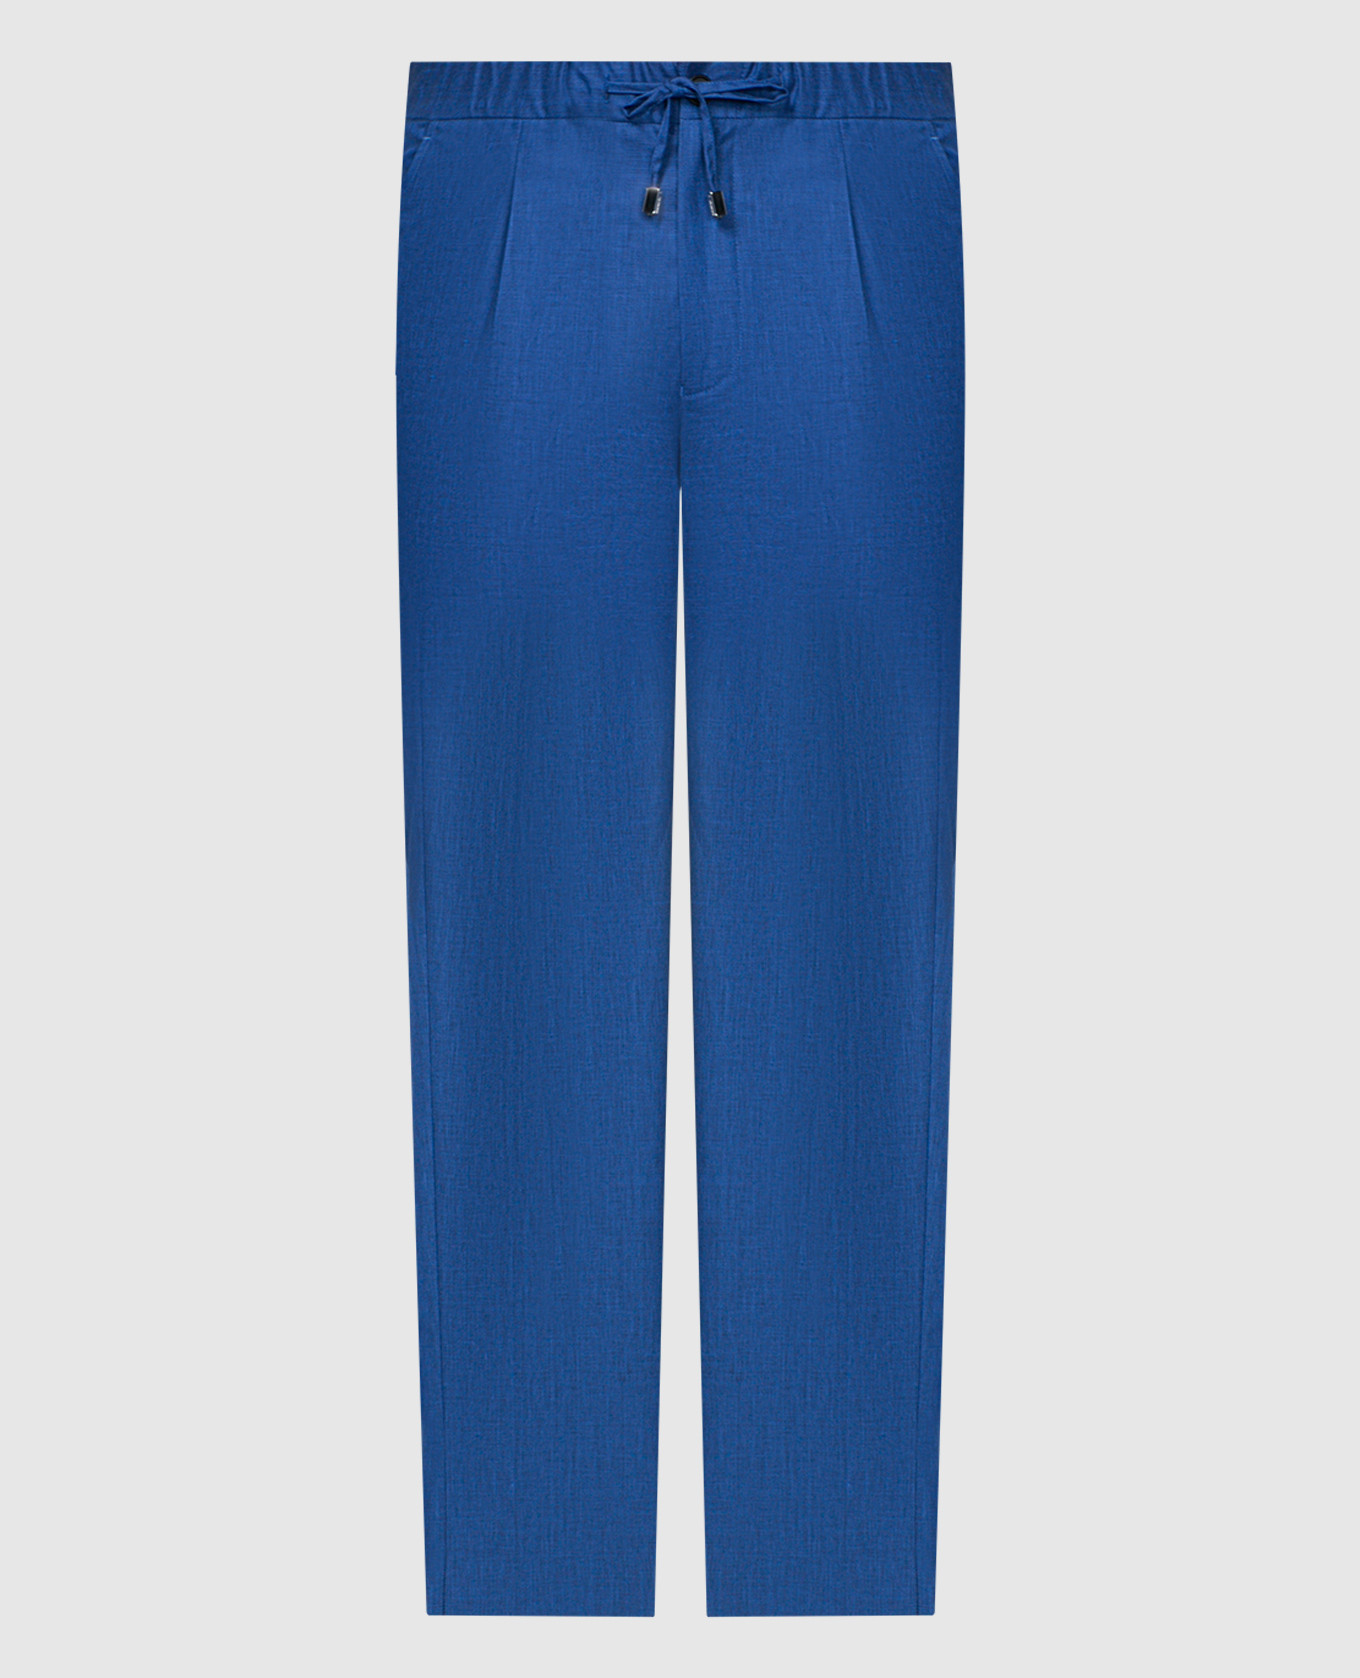 Blue pants made of linen, wool and silk